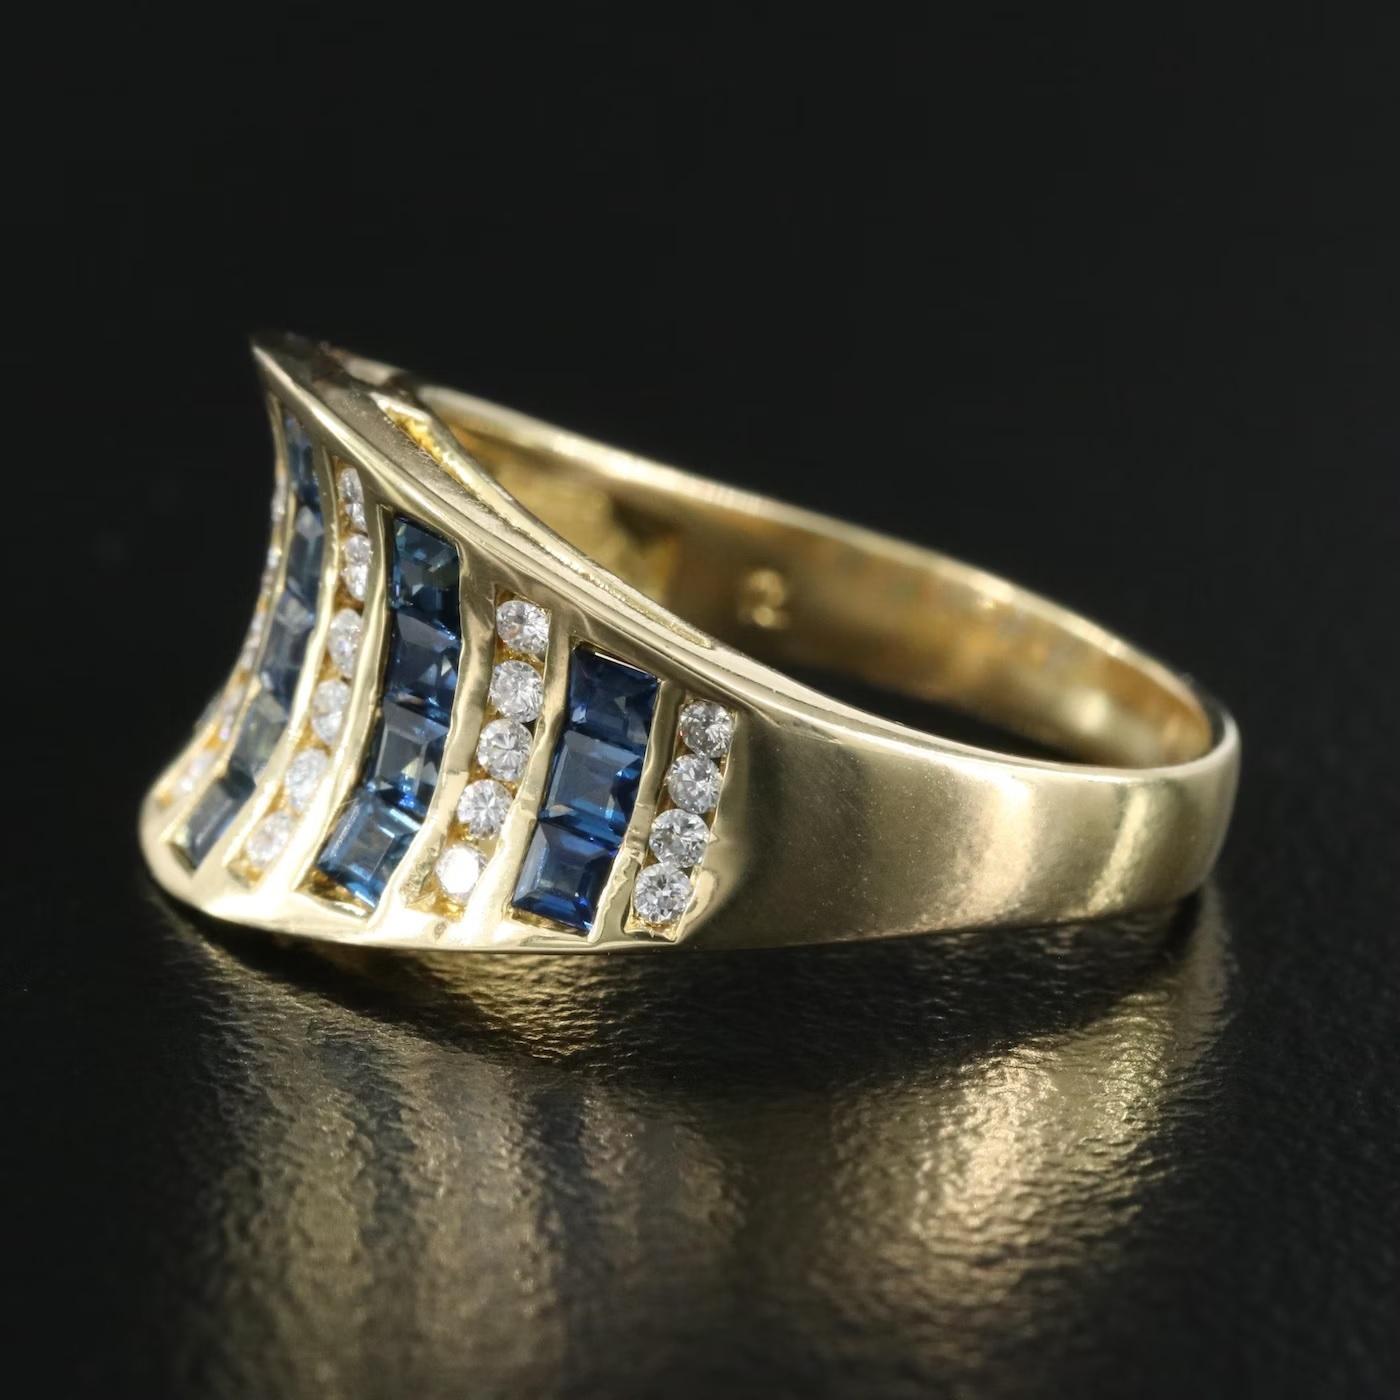 New / Italy Rimani Diamond and Blue Sapphire Ring / 18k Yellow Gold 2